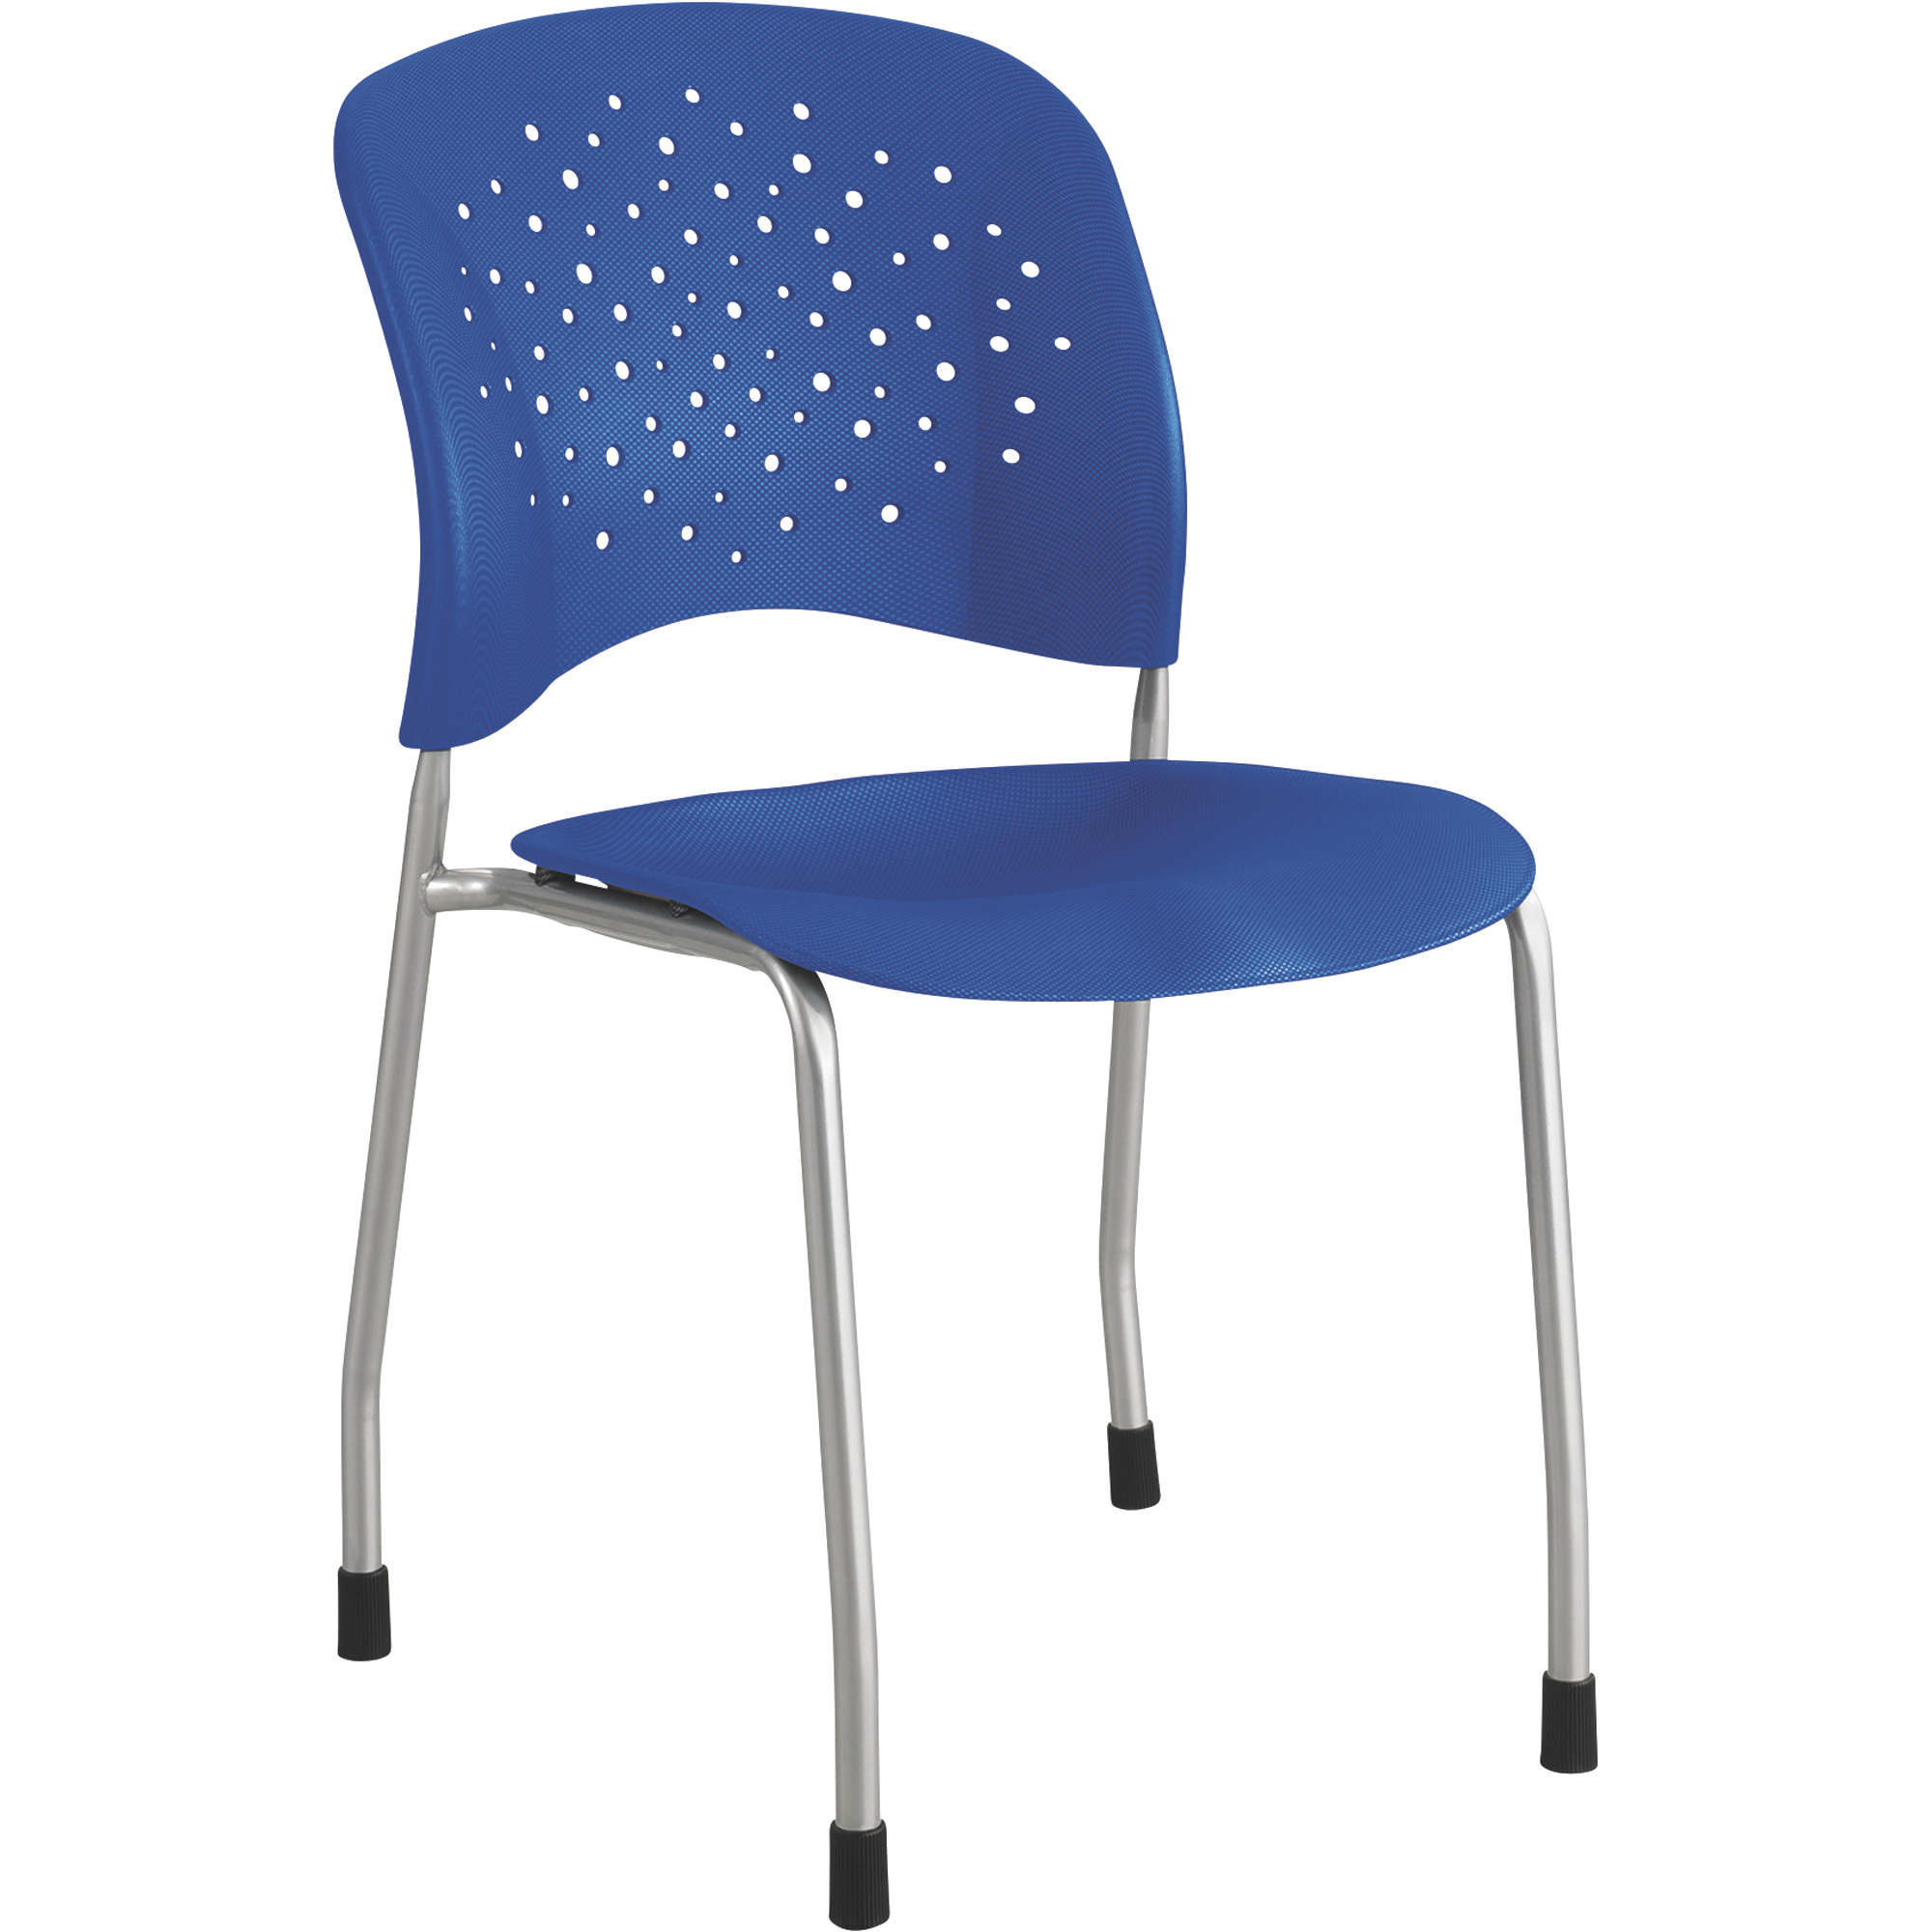 Safco Reve Guest Chairs with Straight Legs and Round Back — Set of 2, Blue, Model 6805BU -  Mayline Safco